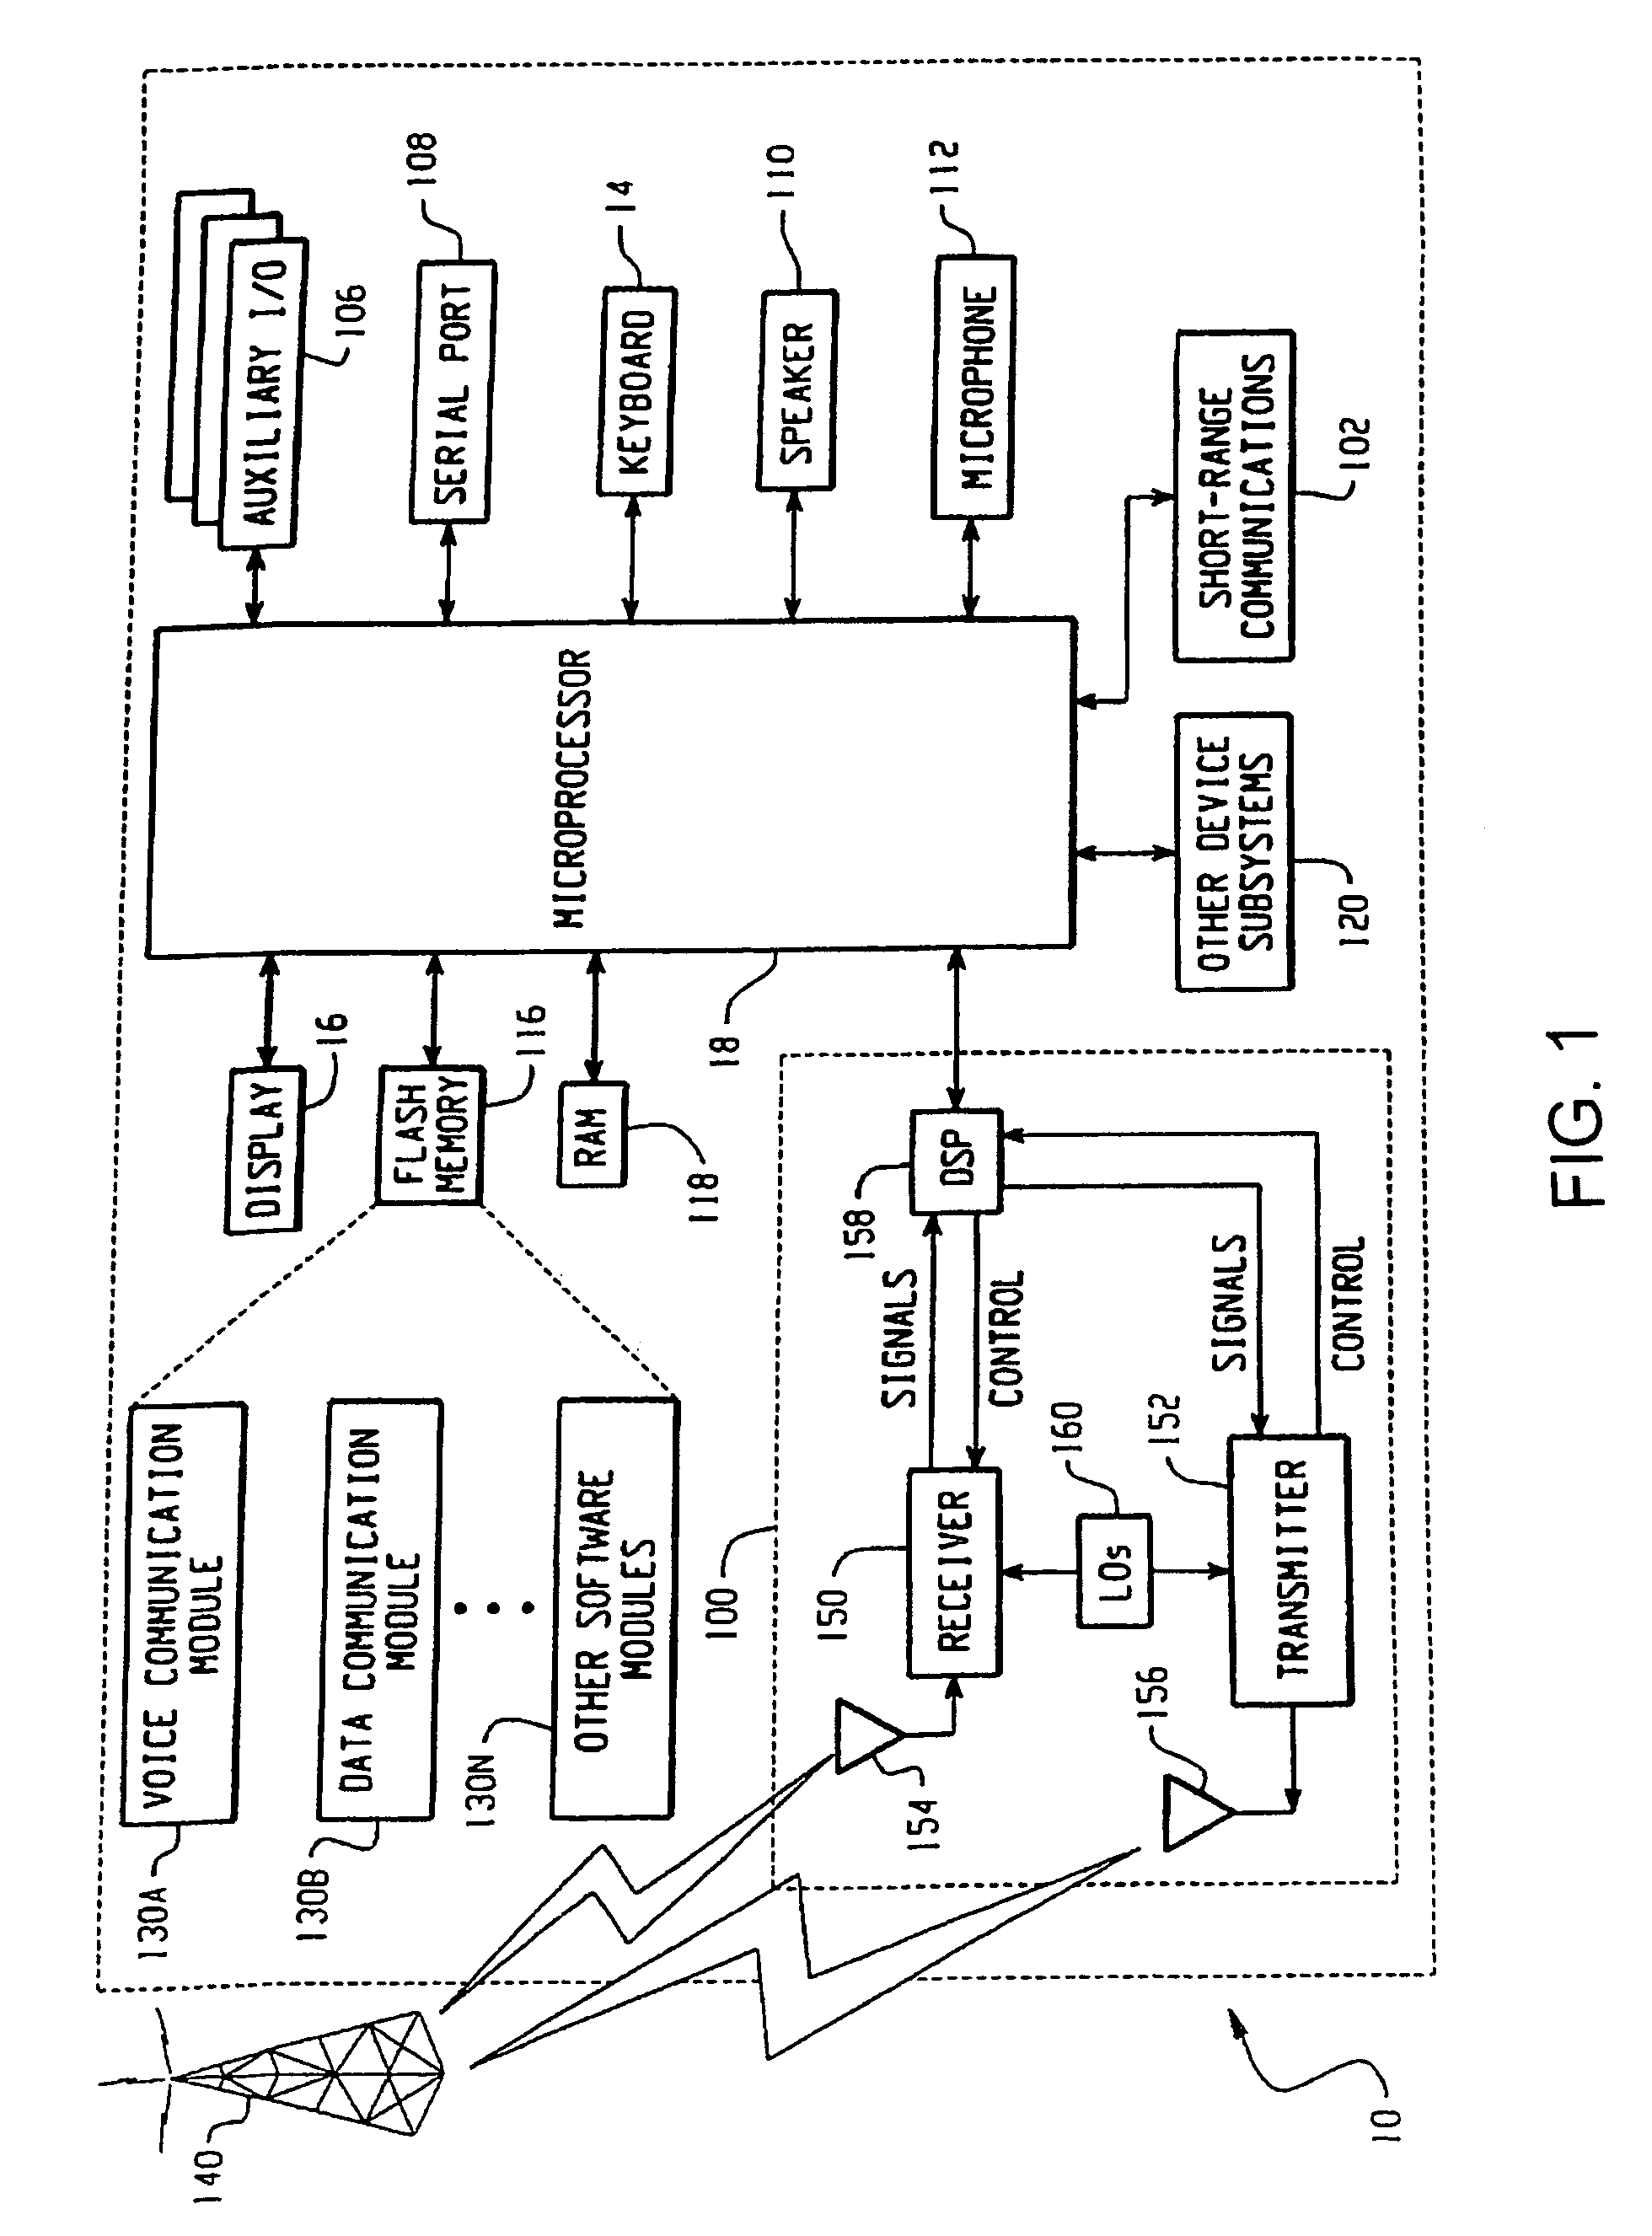 System and method for automatically saving memory contents of a data processing device on power failure